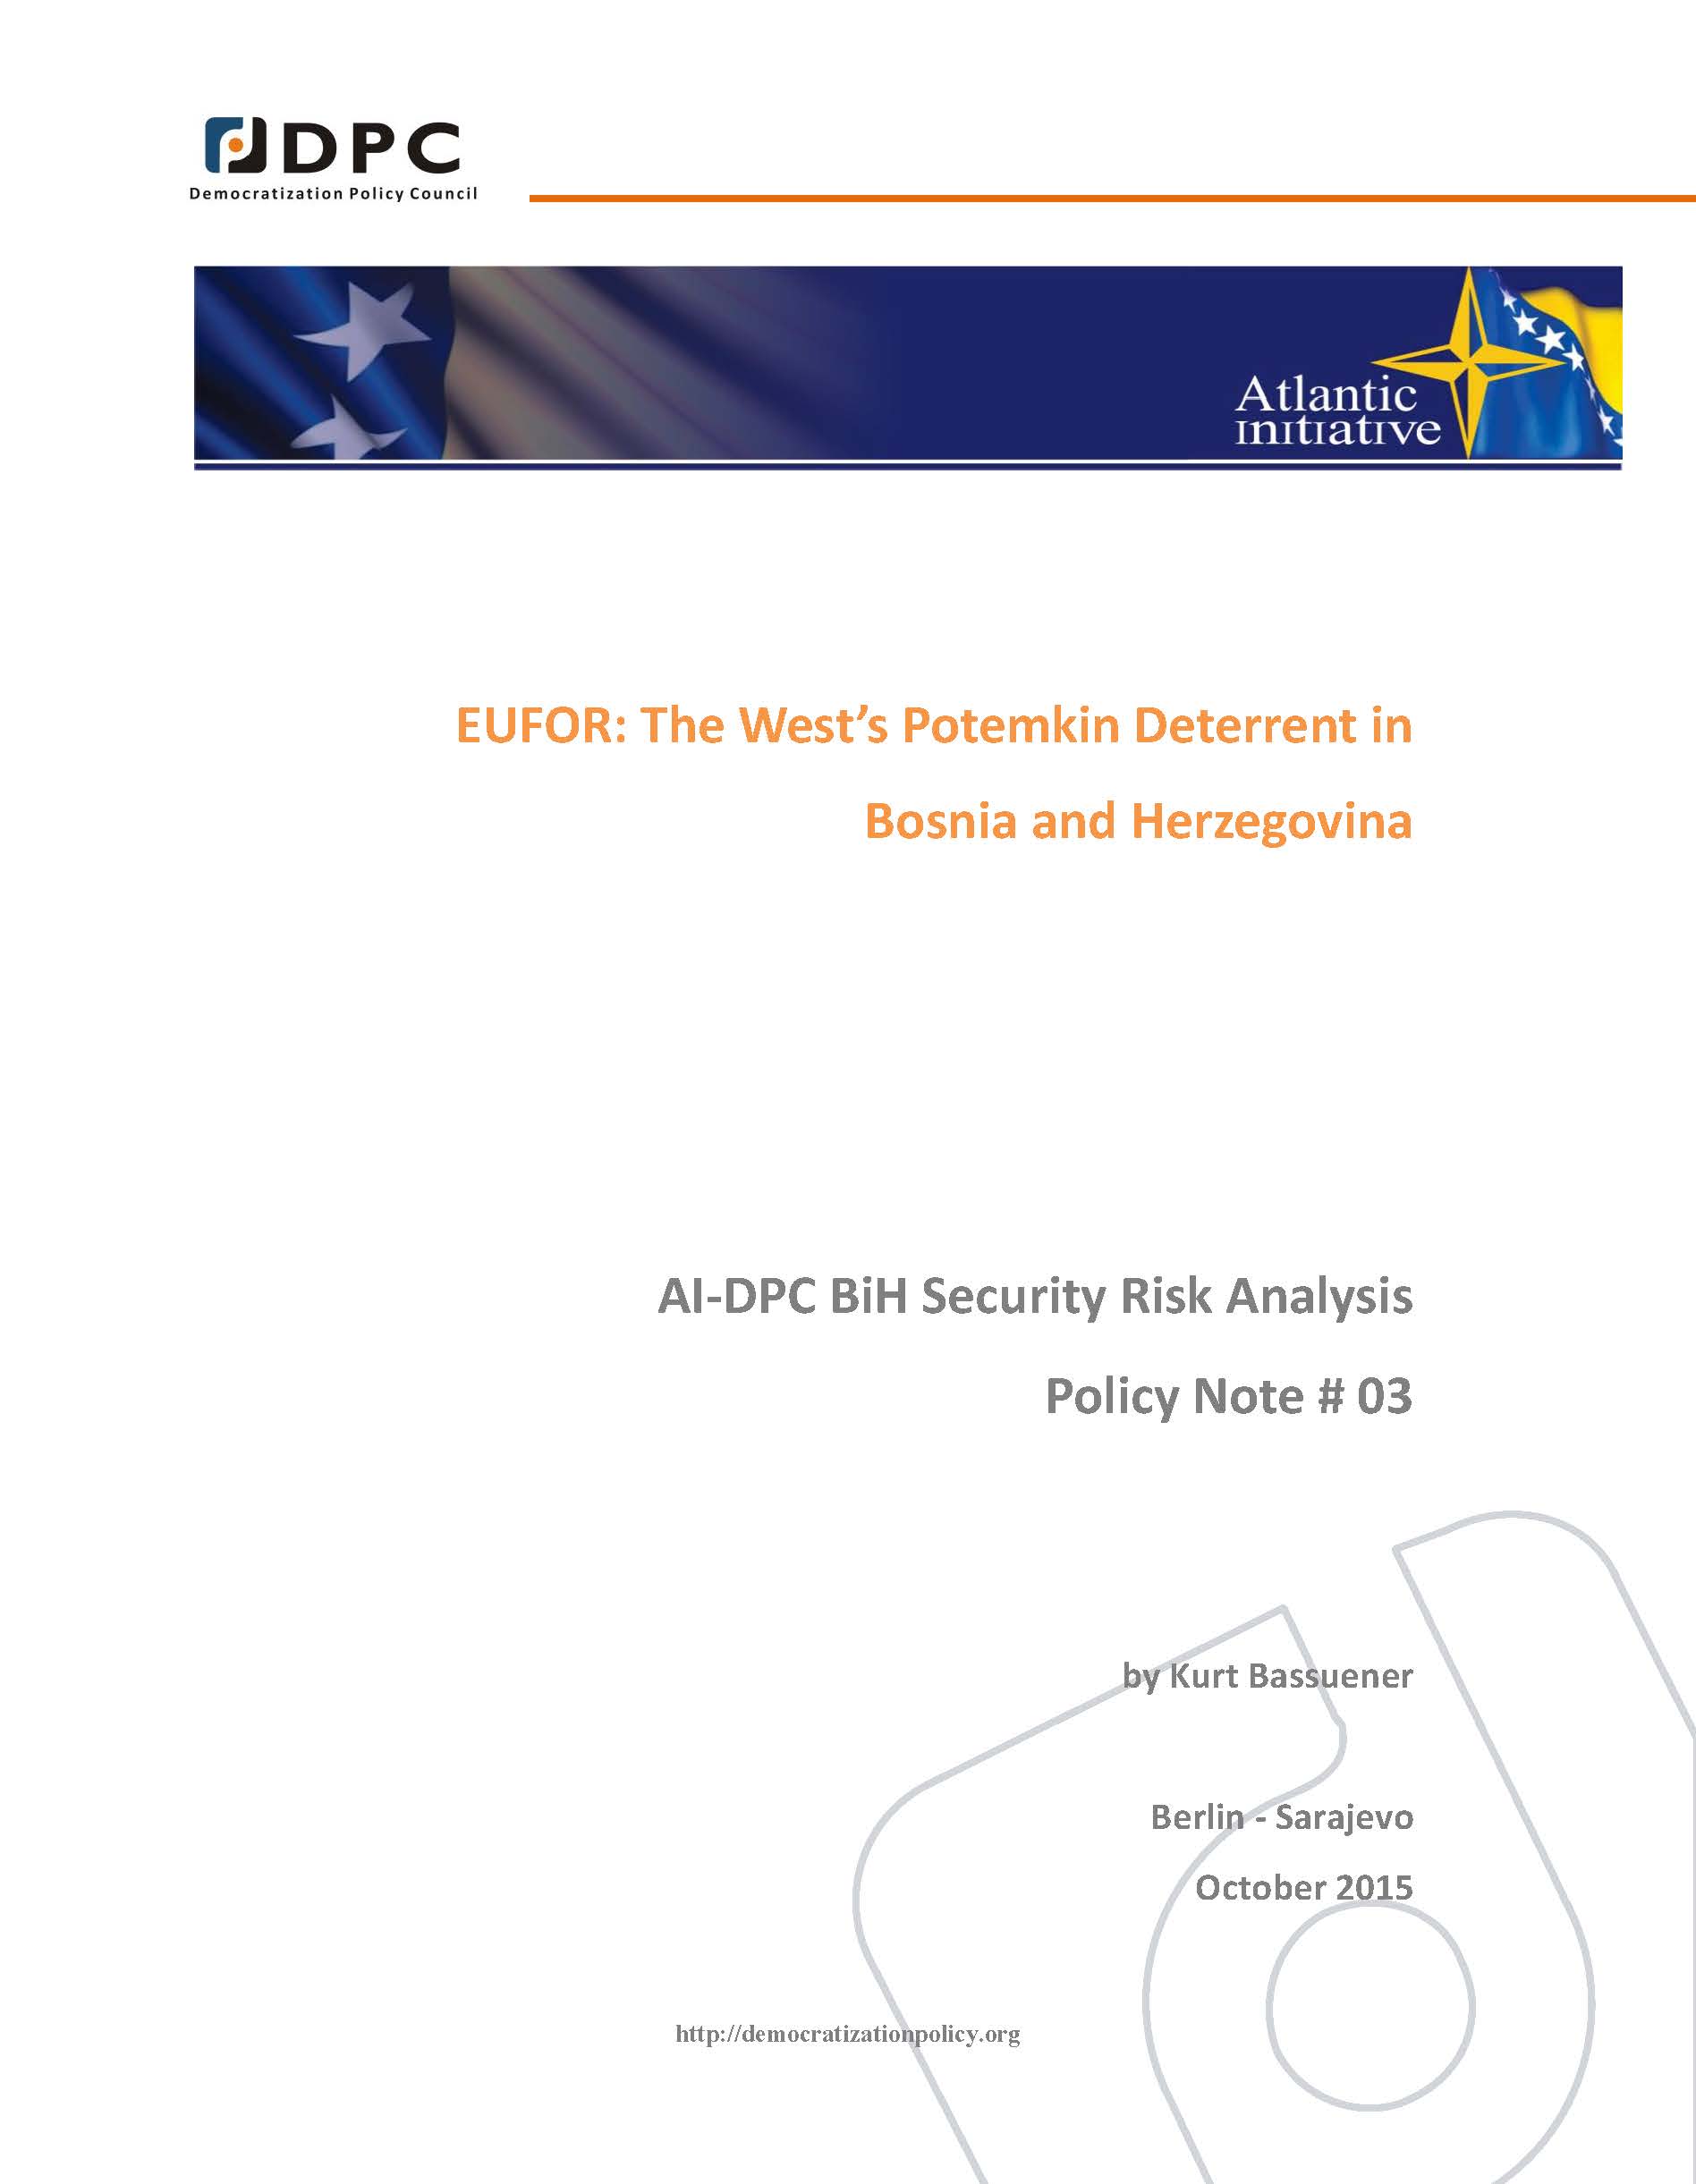 AI-DPC BiH SECURITY ANALYSIS POLICY NOTE 03: EUFOR: The West’s Potemkin Deterrent in Bosnia and Herzegovina